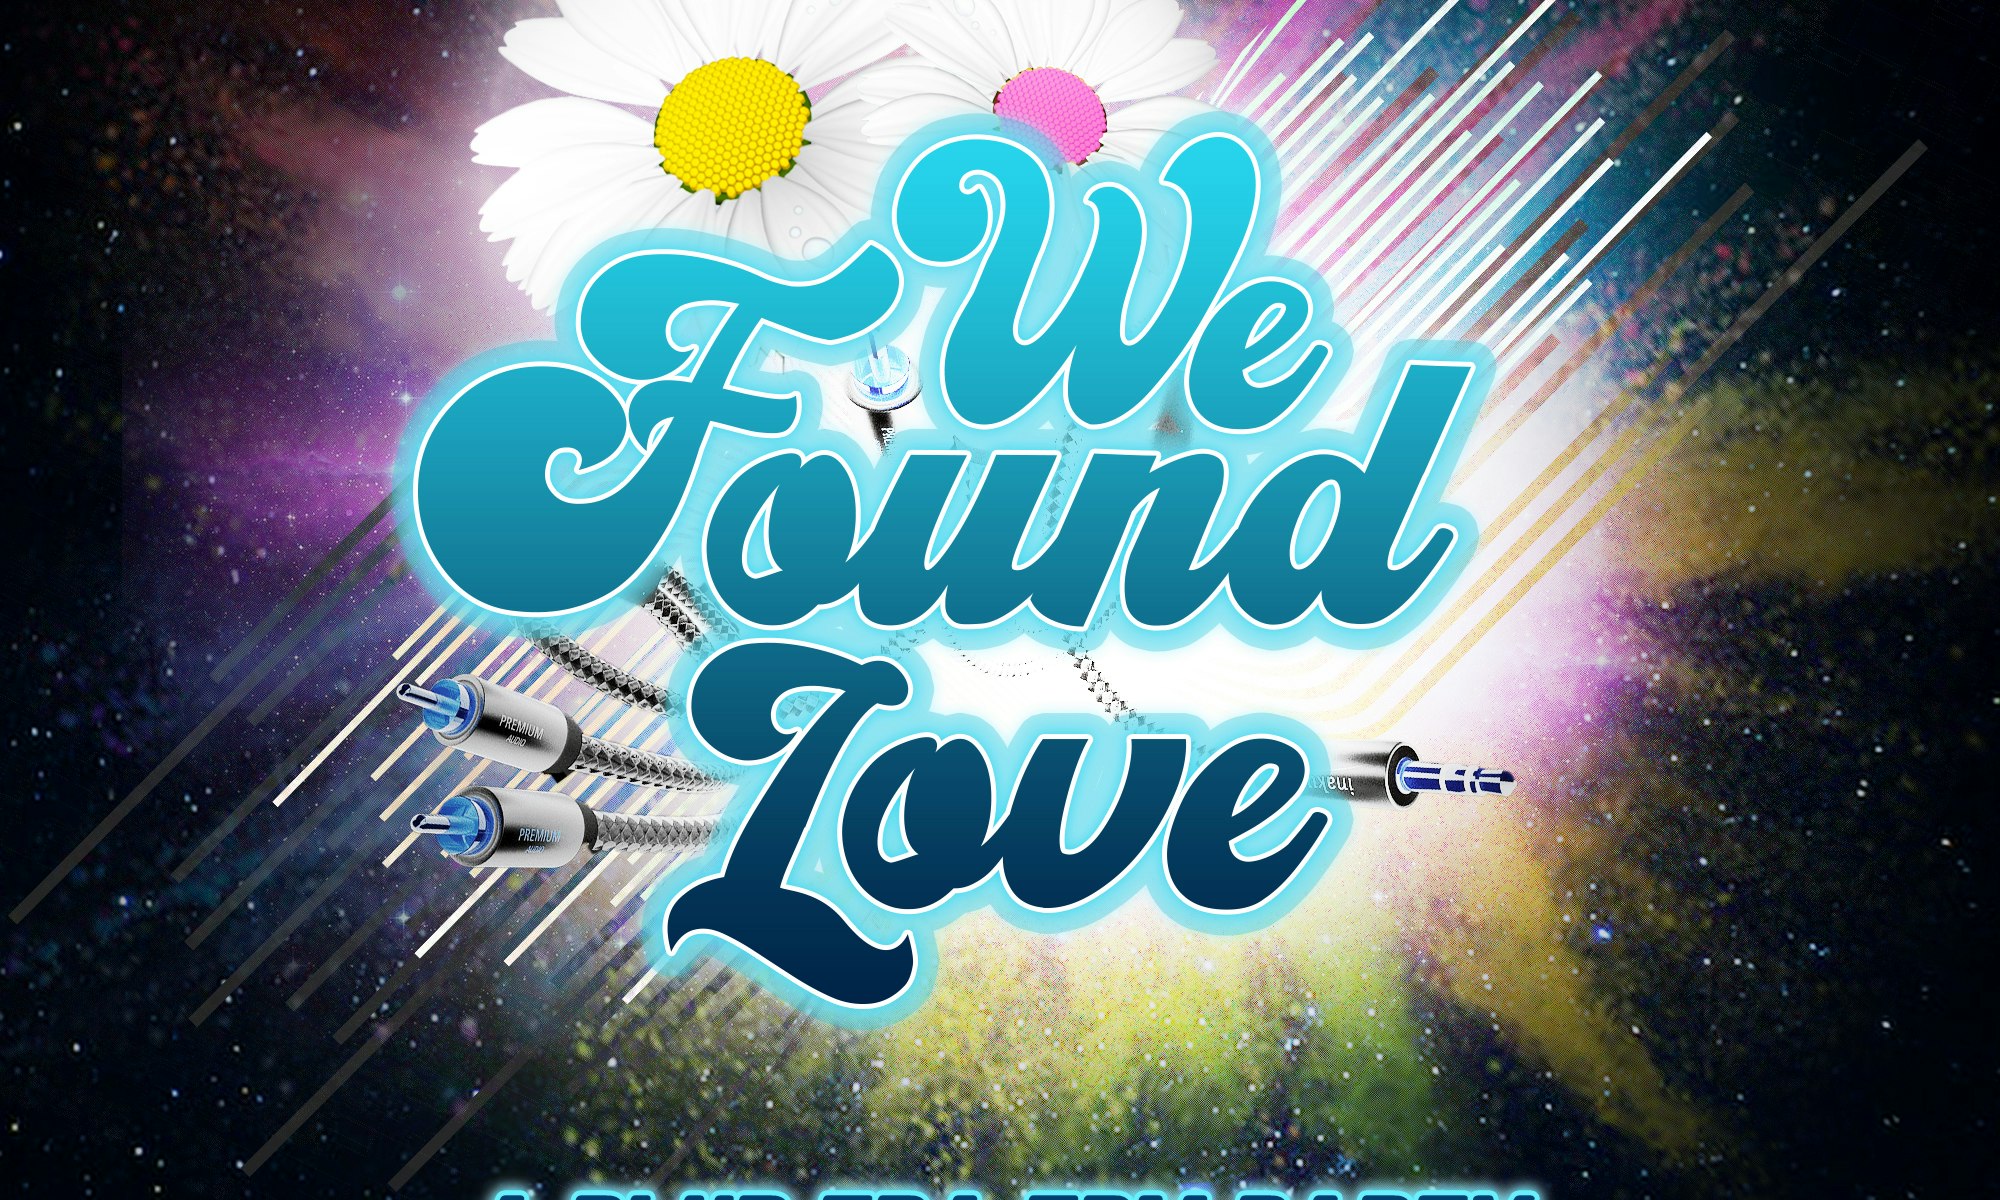 We Found Love: A Plur Era Edm Party Tickets, From Free, 19 Jan @ The  Virgil, Los Angeles